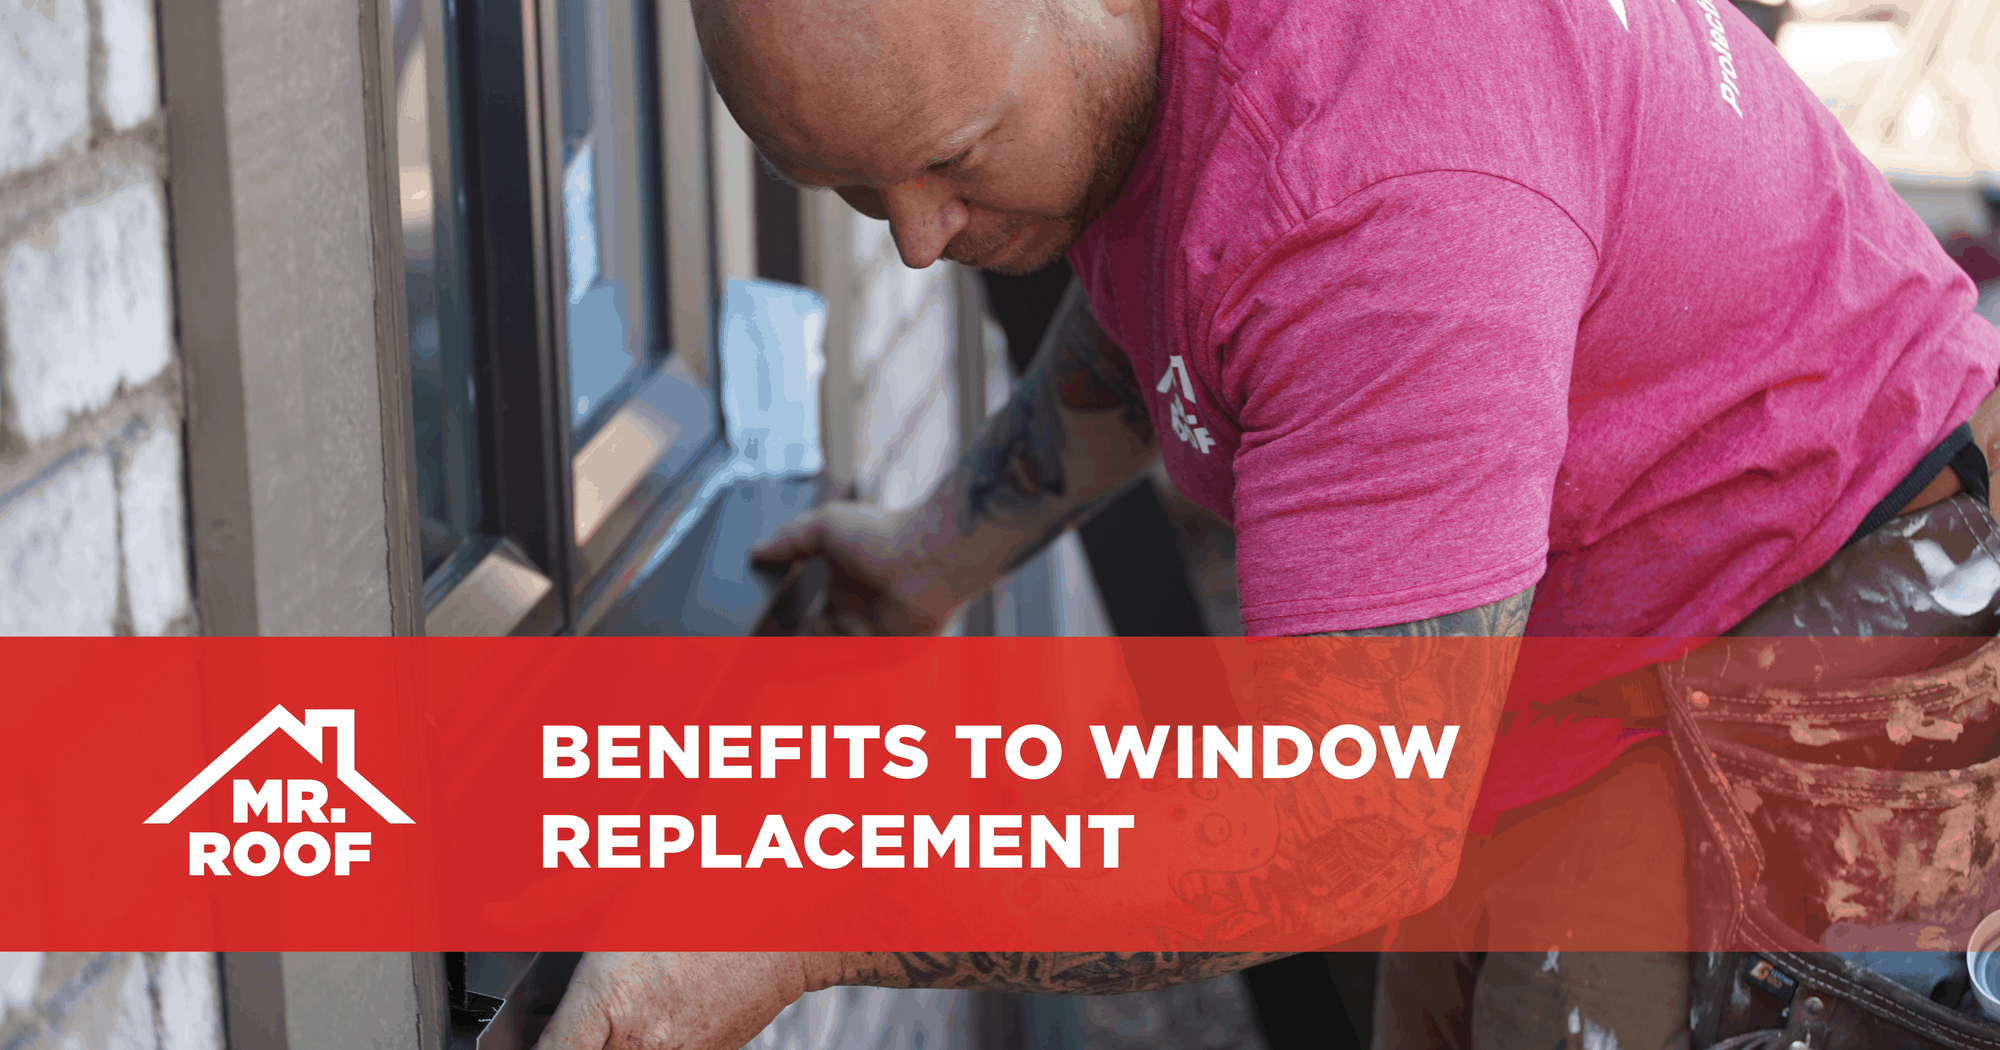 Benefits to window replacement